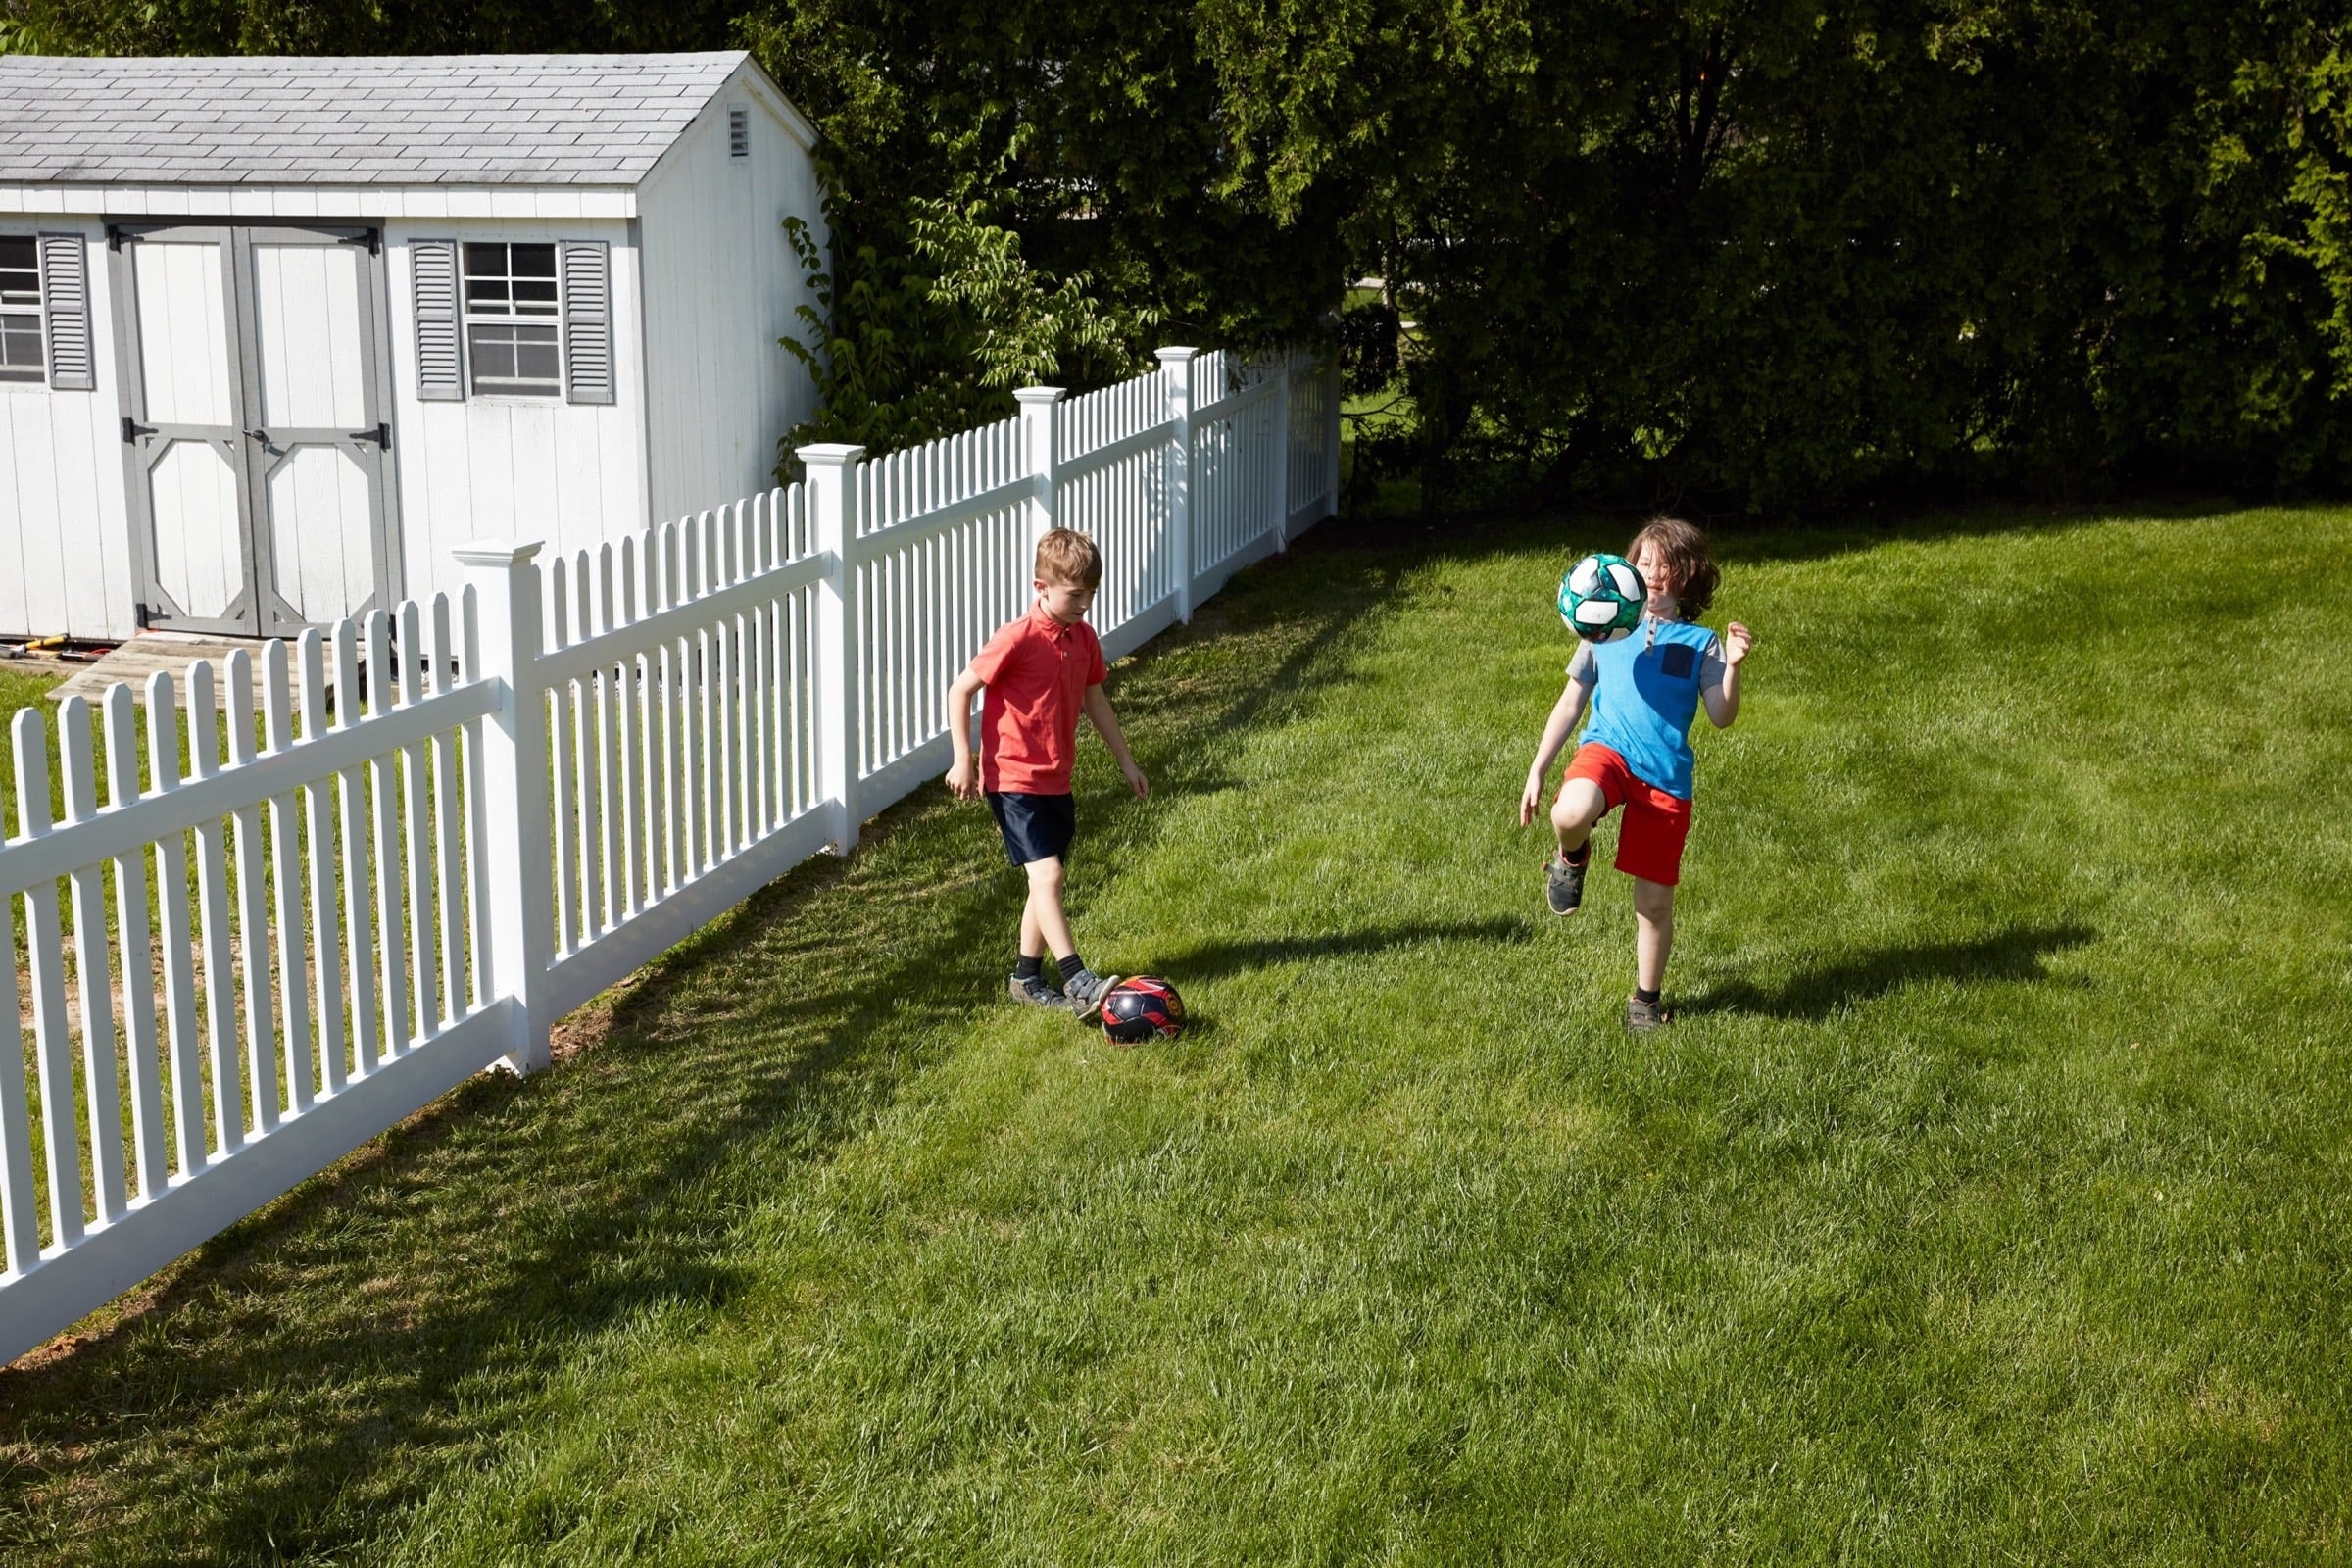 Two kids kicking a soccer ball in front of an activeyards fence